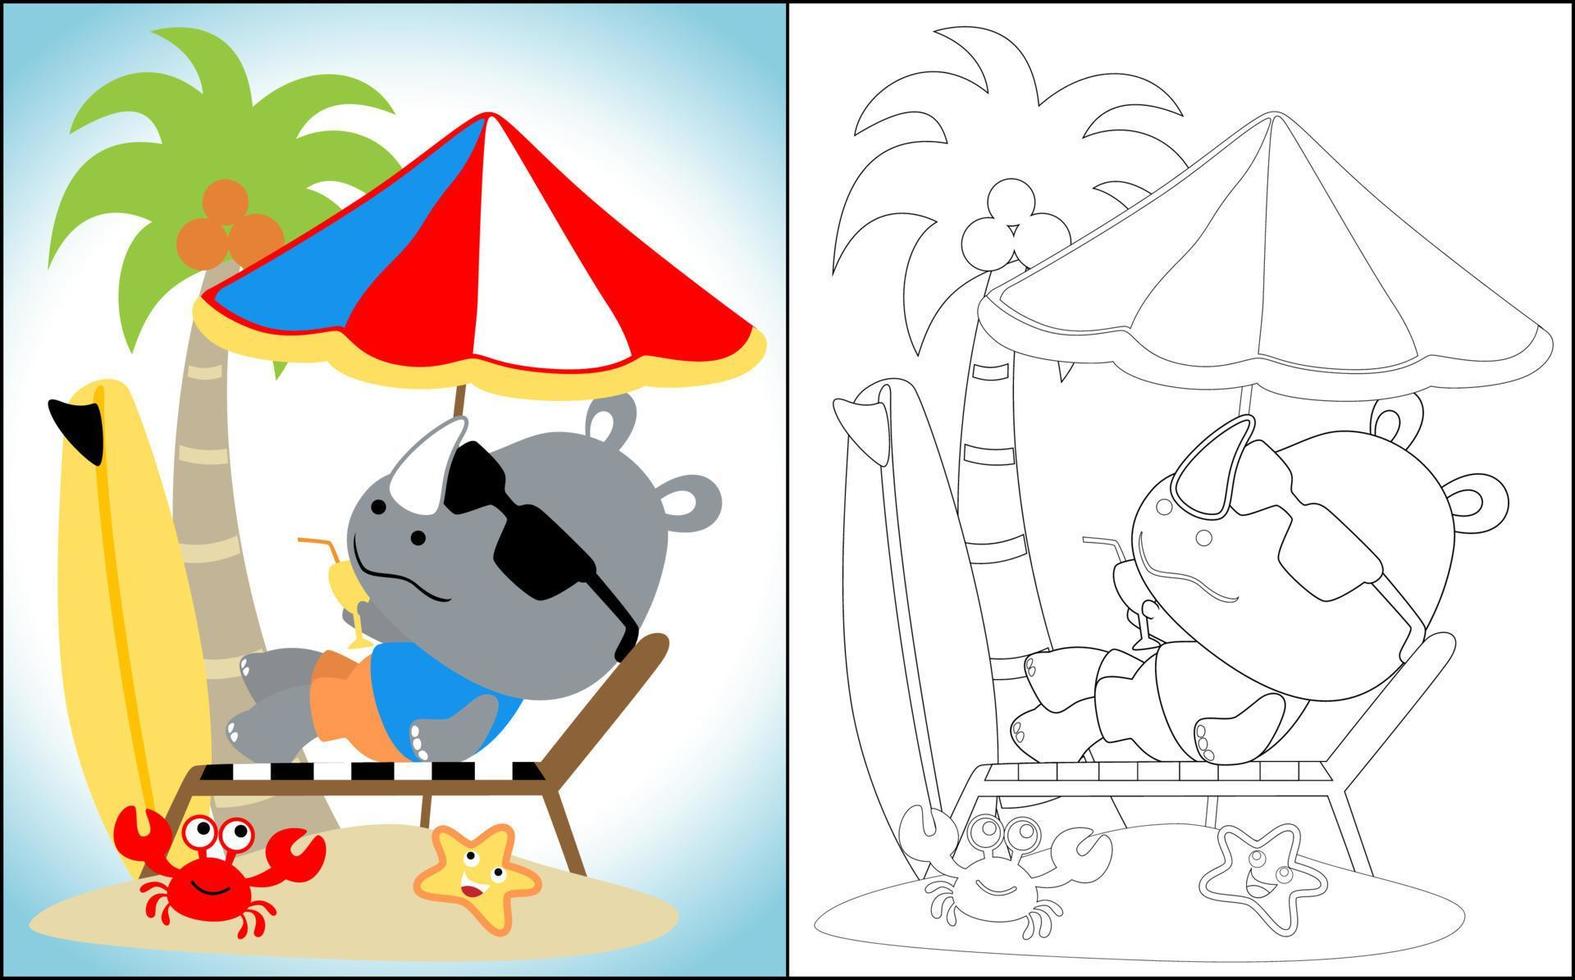 Coloring book or page, funny rhino cartoon lying on beach chairs, relaxing under coconut tree with crab and starfish vector